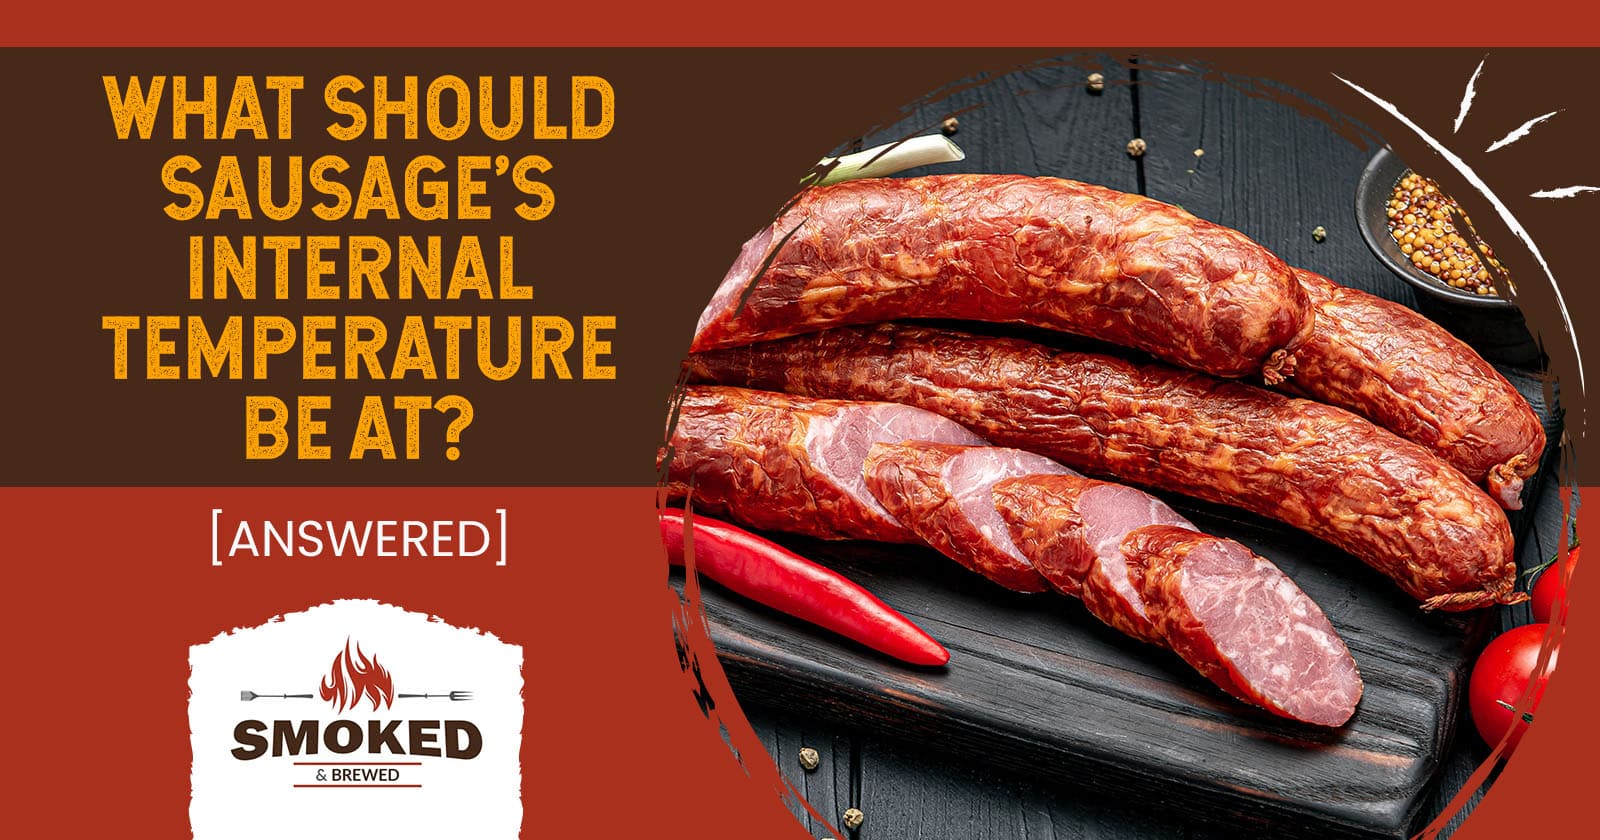 What Should Sausage’s Internal Temperature Be At? [ANSWERED]